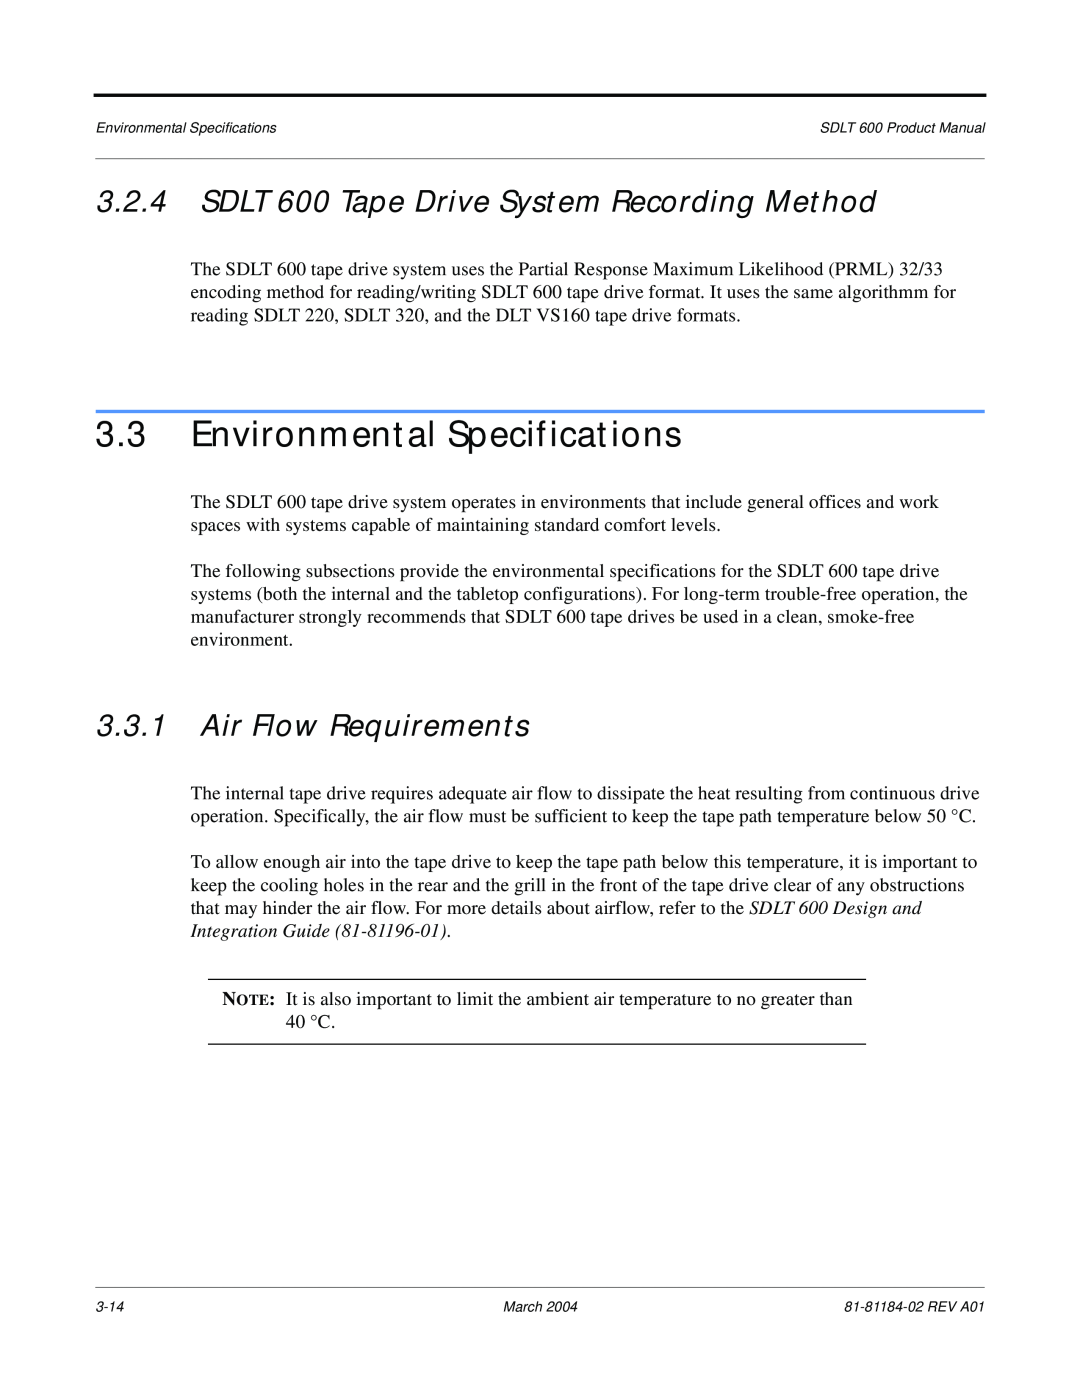 Tandberg Data manual Environmental Specifications, SDLT 600 Tape Drive System Recording Method, Air Flow Requirements 